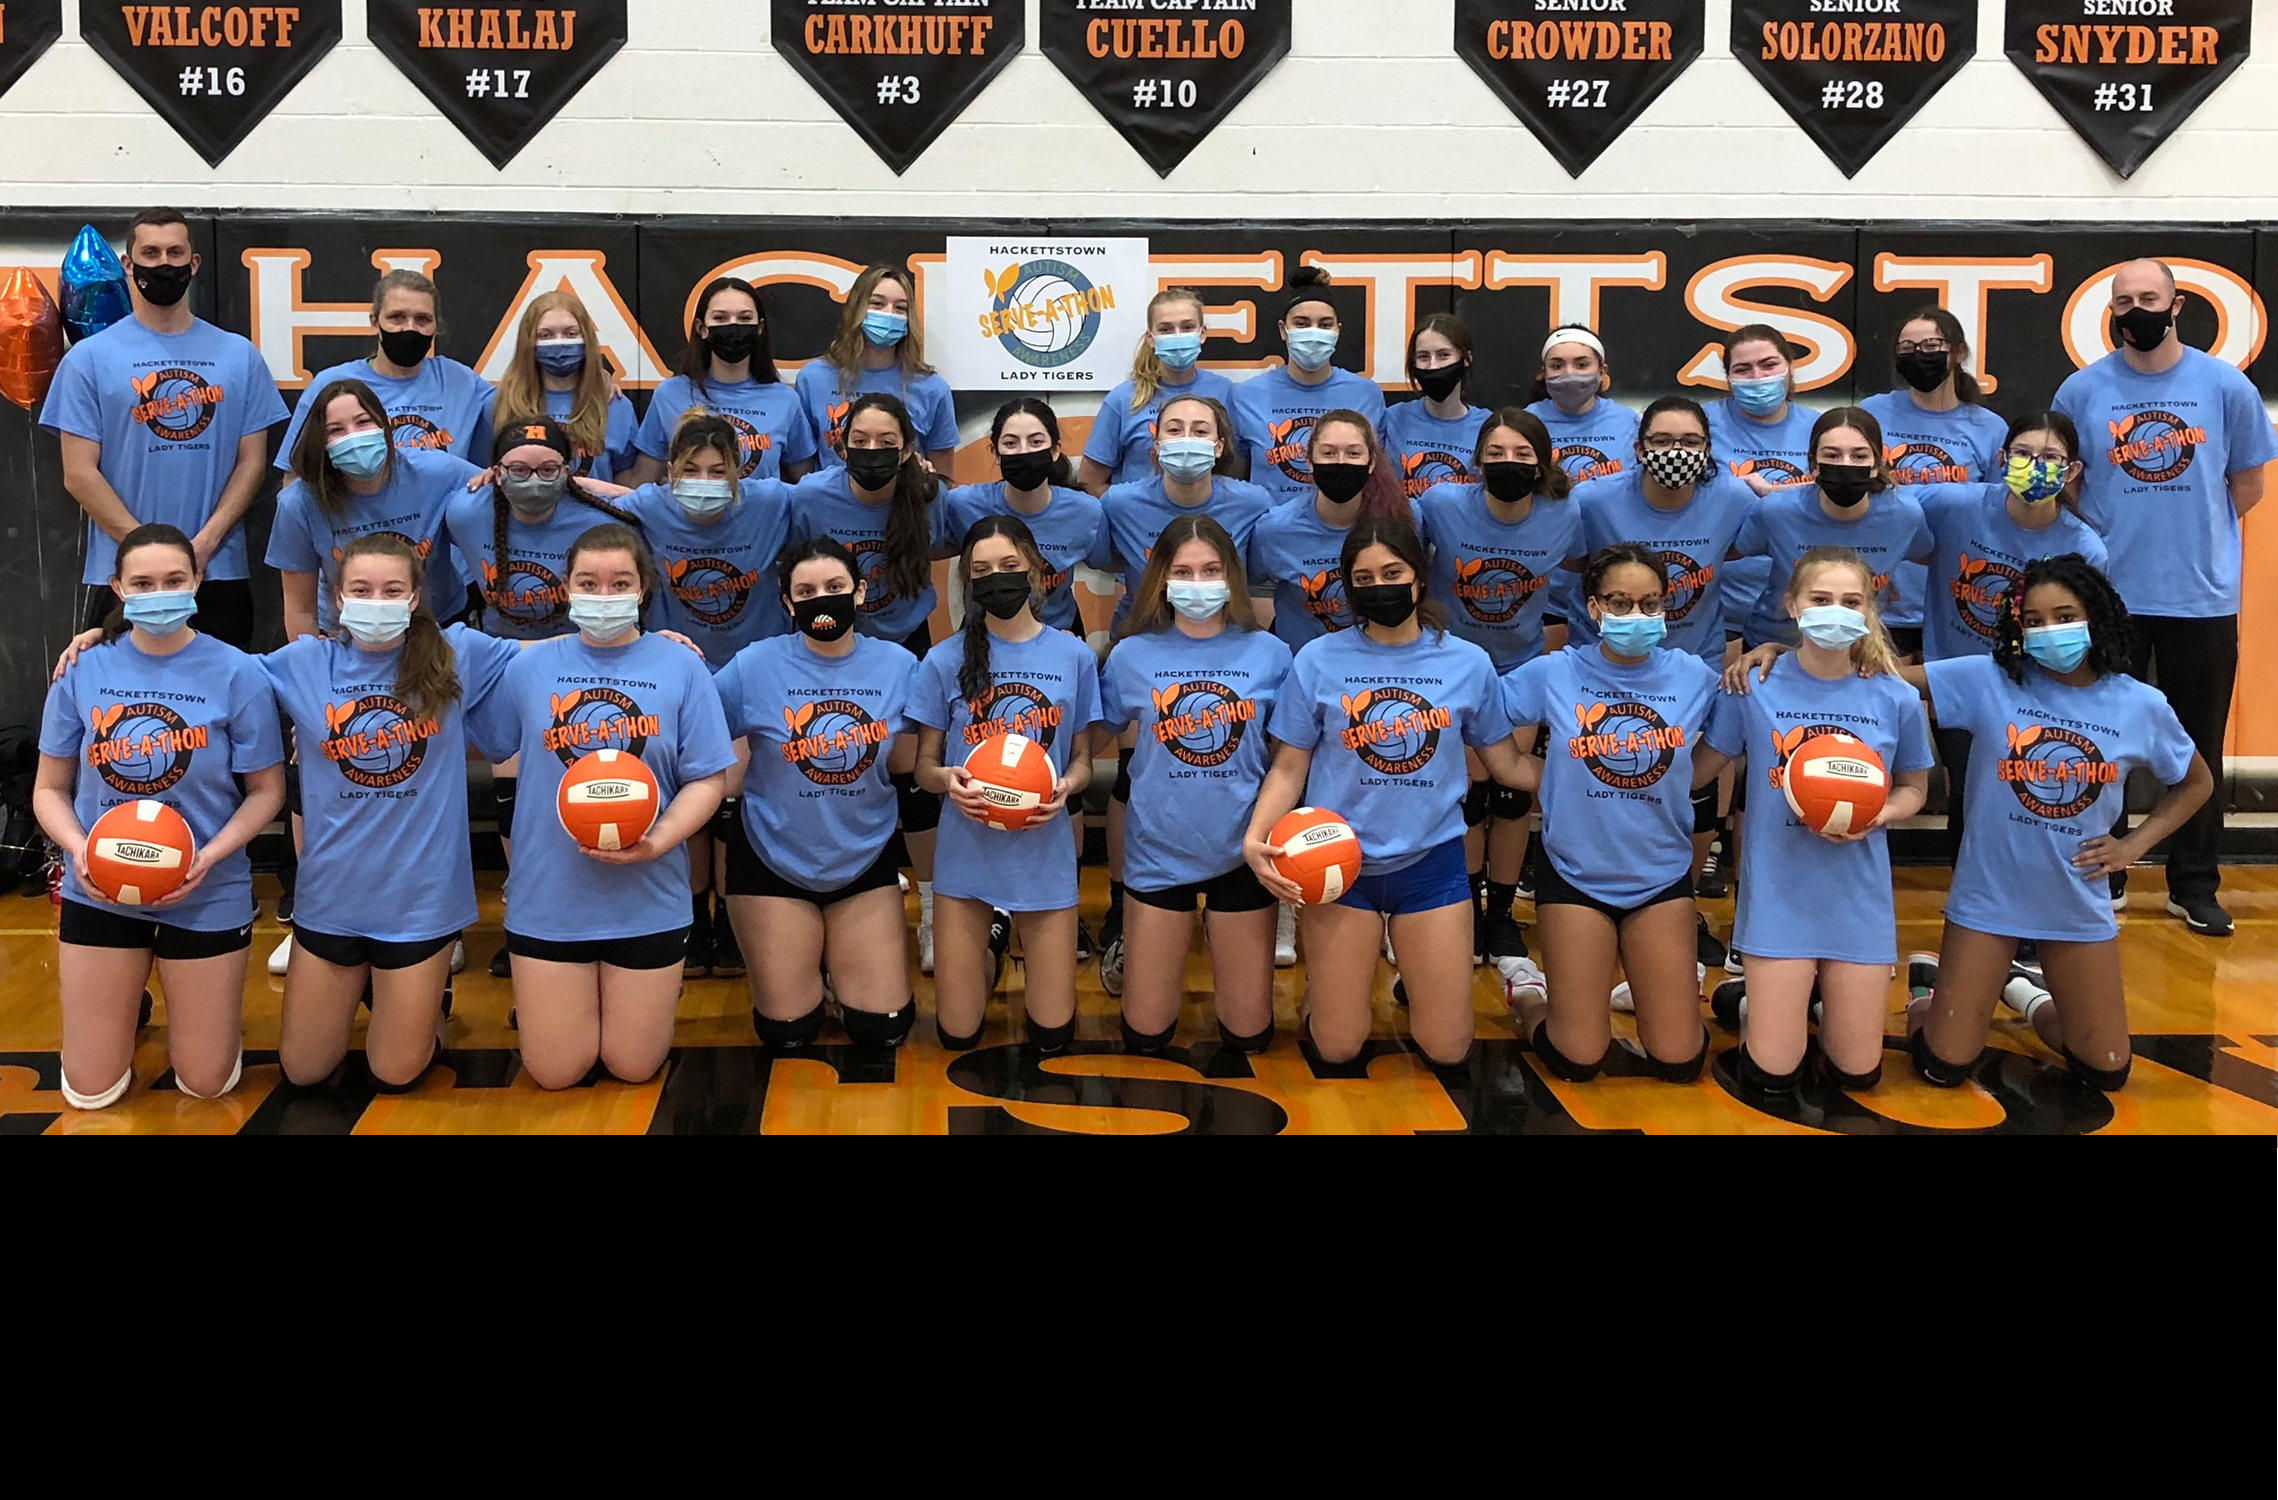 The Hackettstown High School Lady Tiger Volleyball team